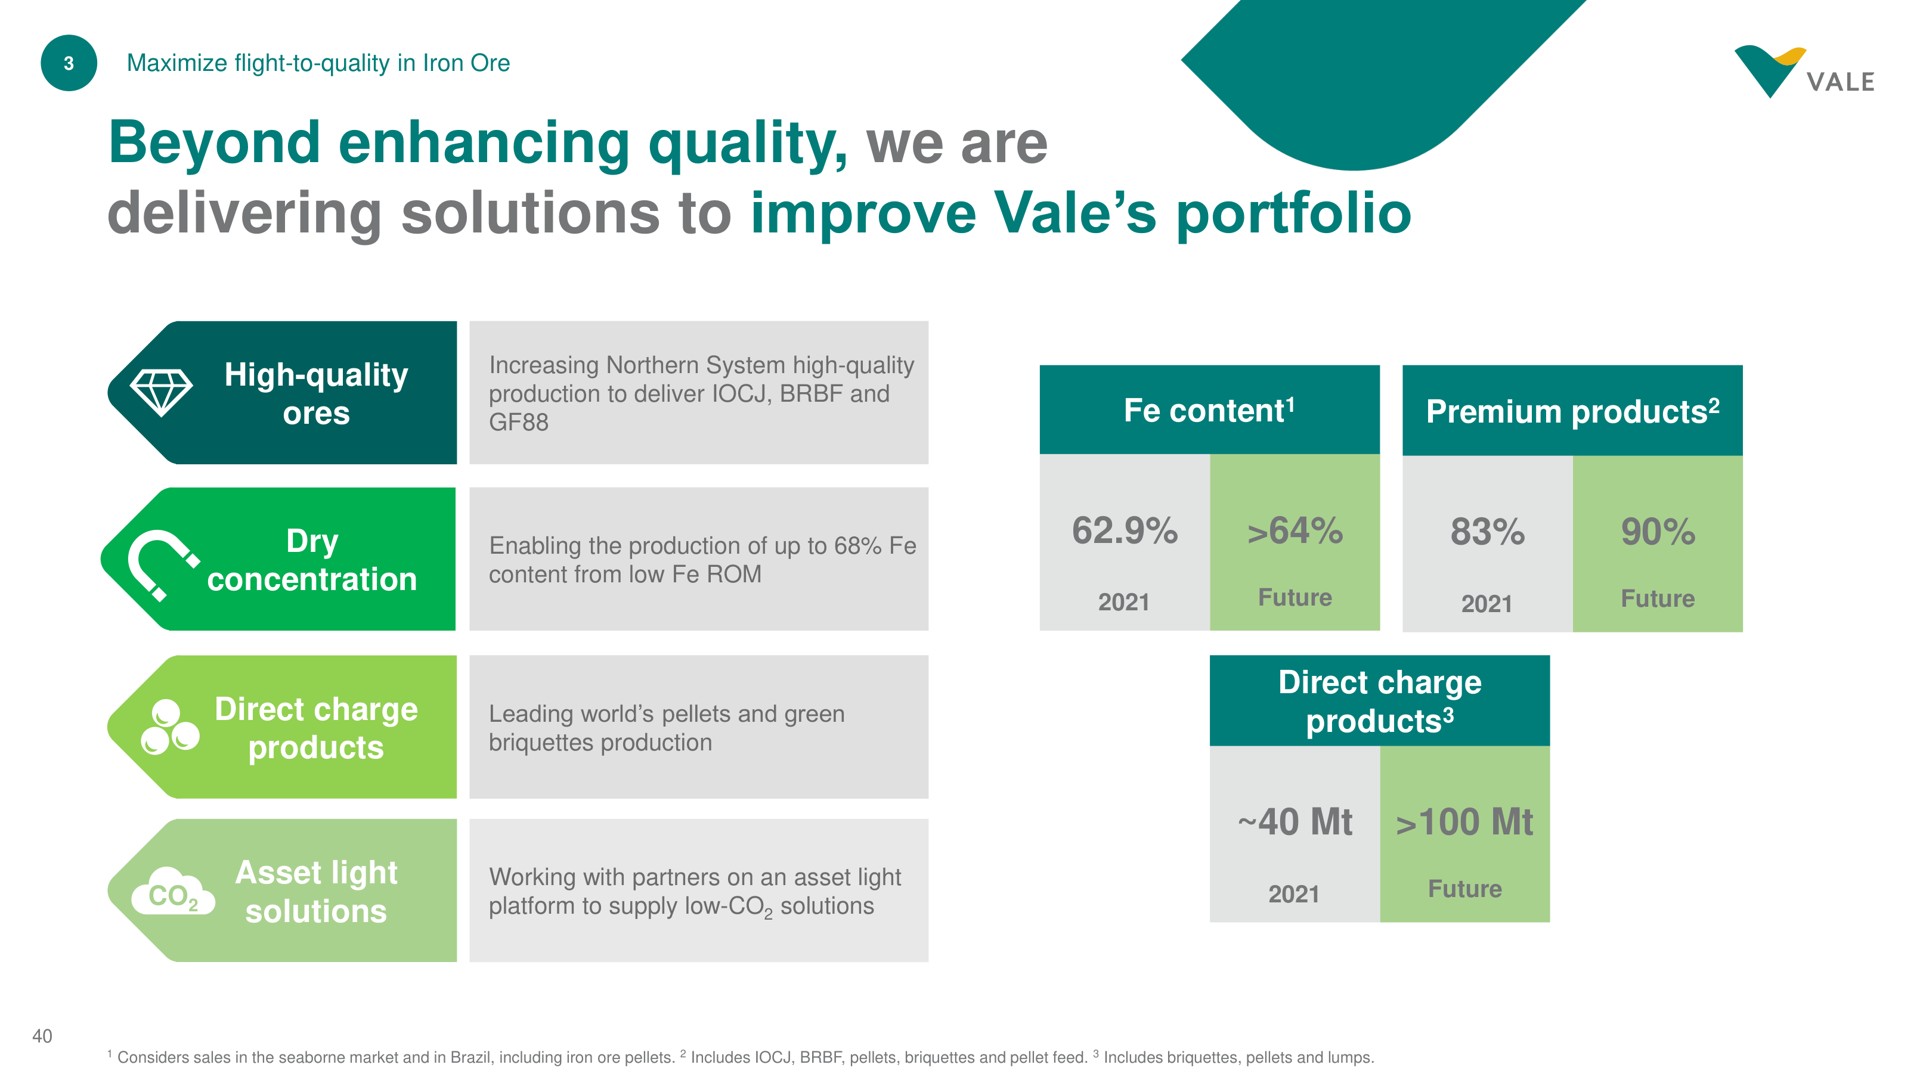 beyond enhancing quality we are delivering solutions to improve vale portfolio | Vale